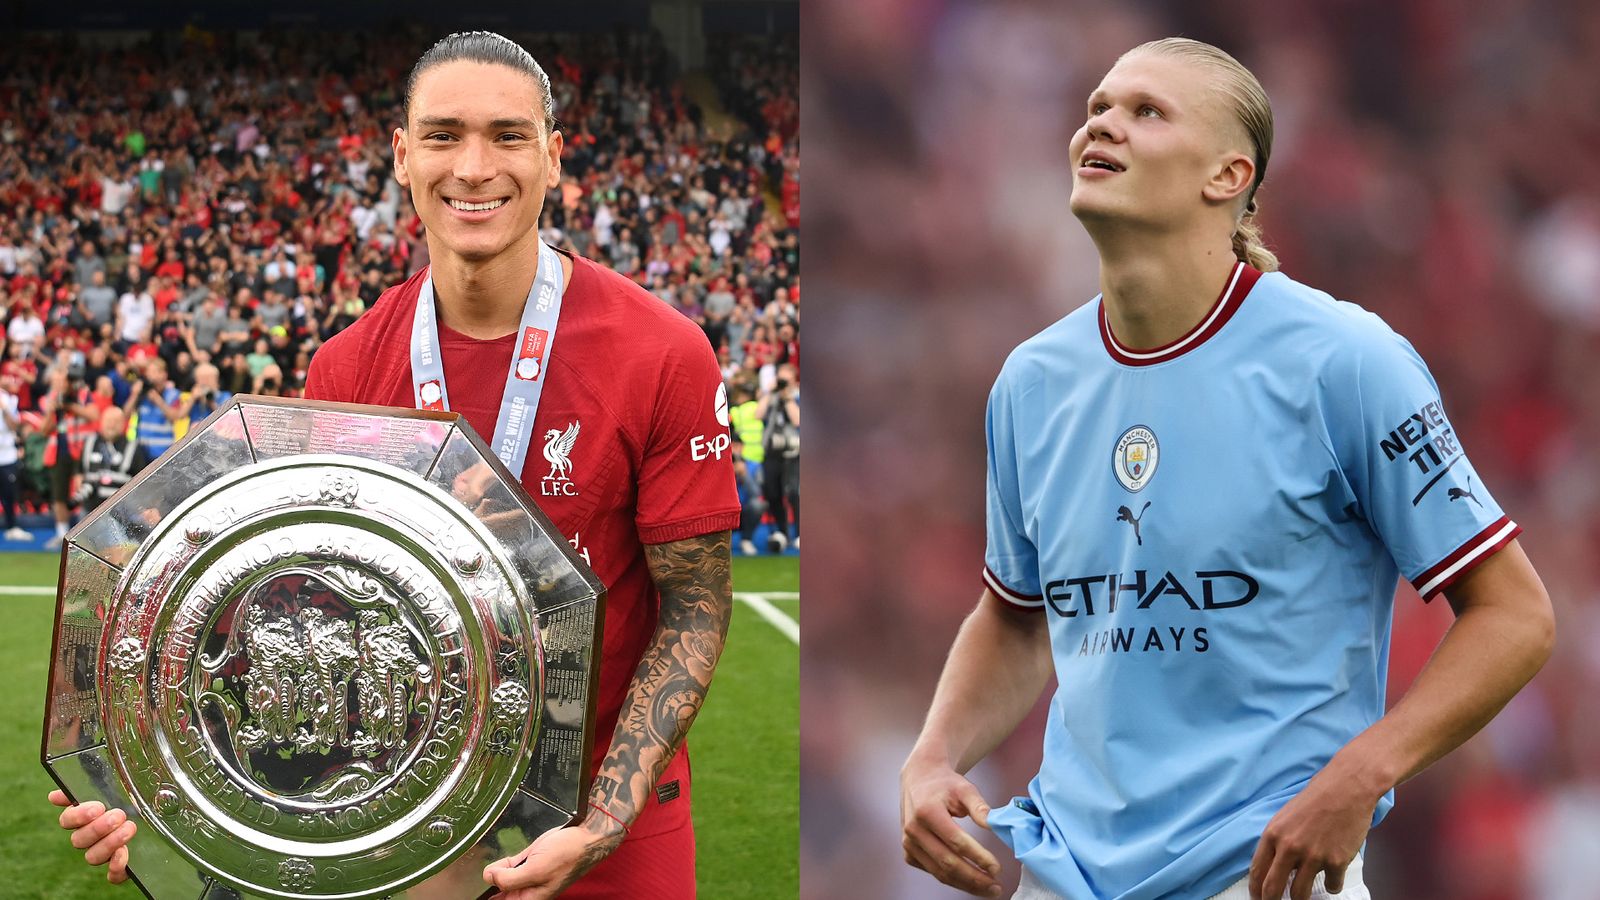 Liverpool play to Darwin Nunez’s strengths in Community Shield win as Manchester City fail to find focal point Erling Haaland